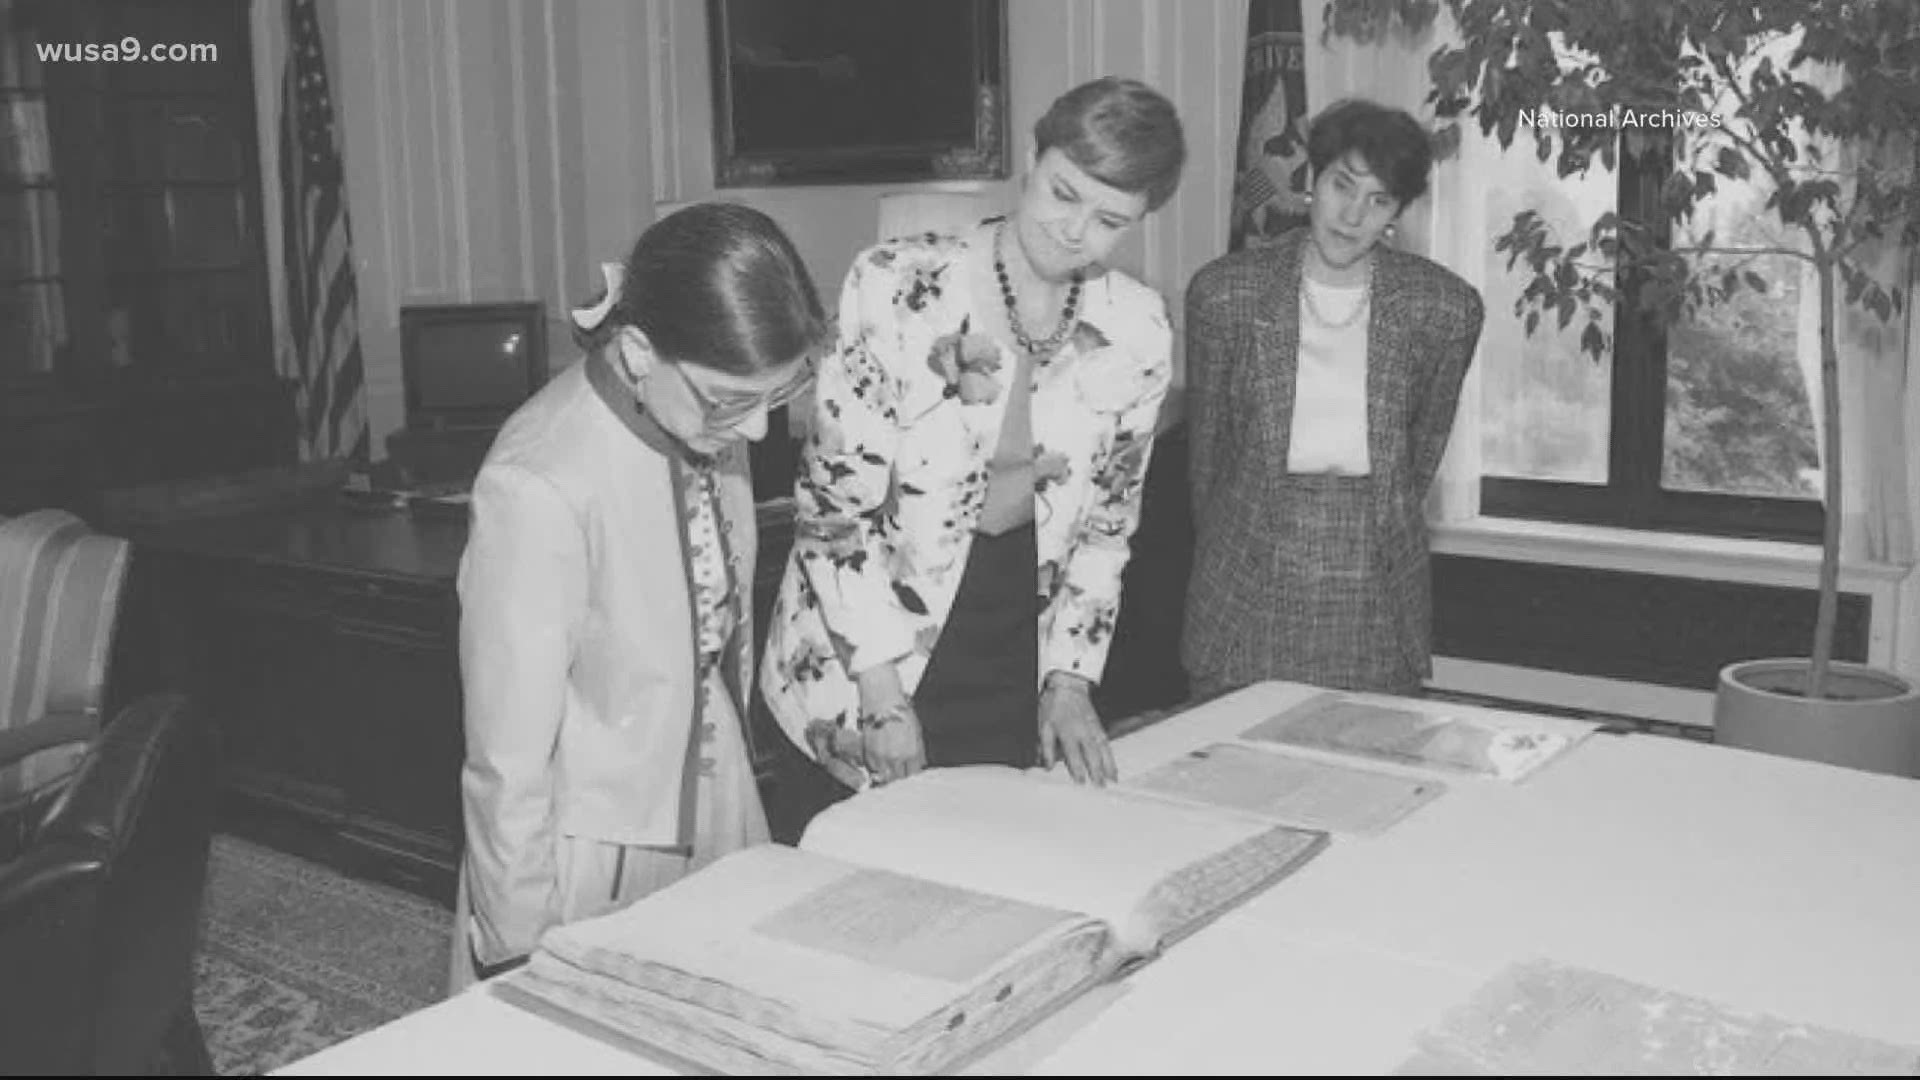 Supreme Court Justice Ruth Bader Ginsburg asked to see the document during a visit to the National Archives. The 19th Amendment gave women the right to vote.